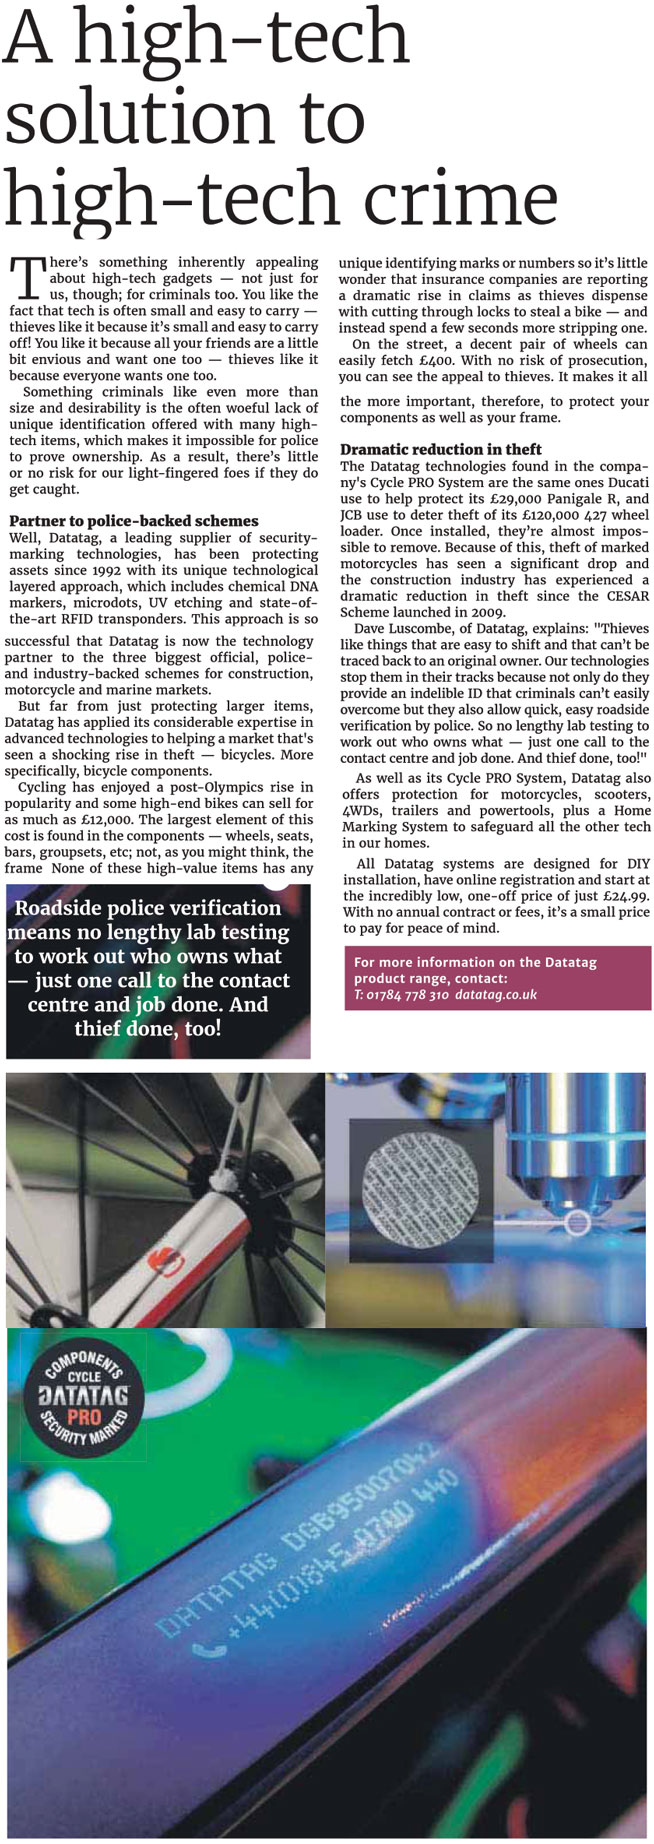 THE GUARDIAN (ON THE PULSE) NEWS FEATURE - A HIGH-TECH SOLUTION TO HIGH-TECH CRIME